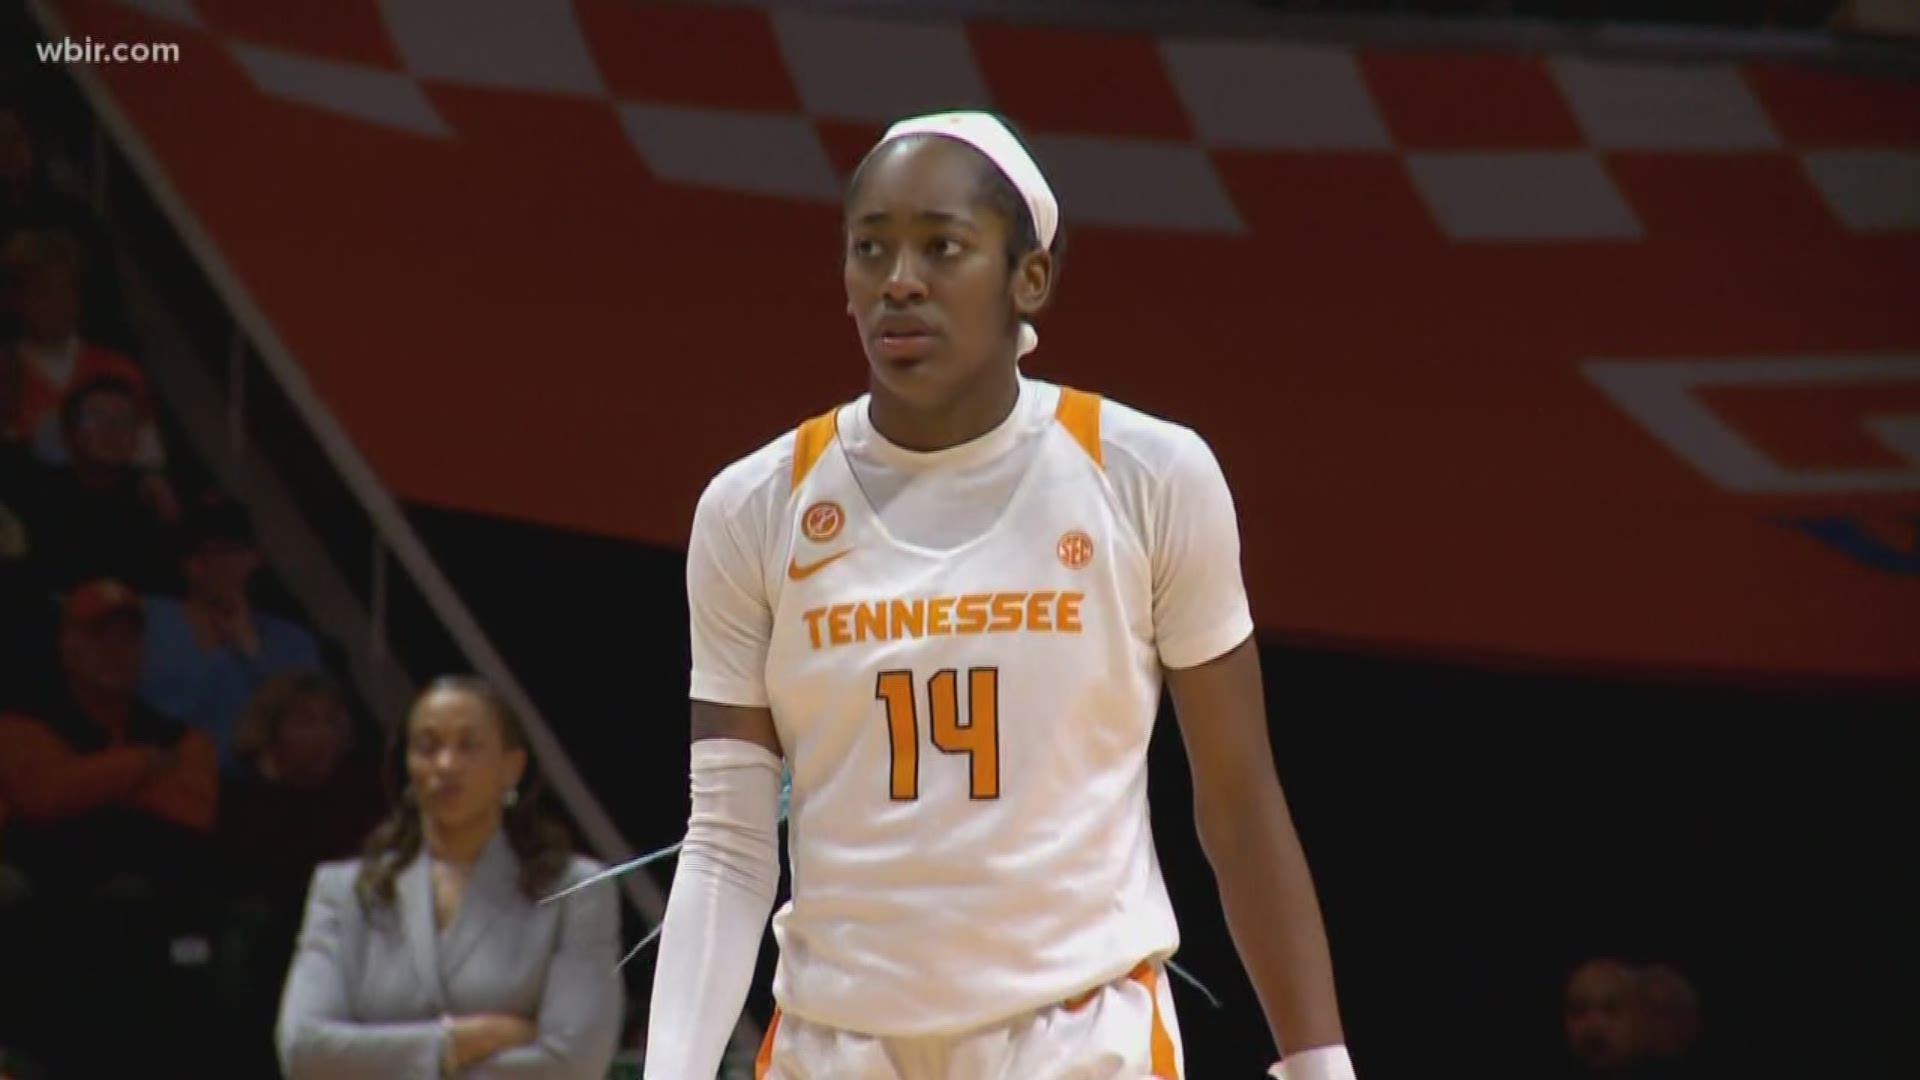 The Lady Vols pick up an important win over Auburn, move to 16-8 this season.